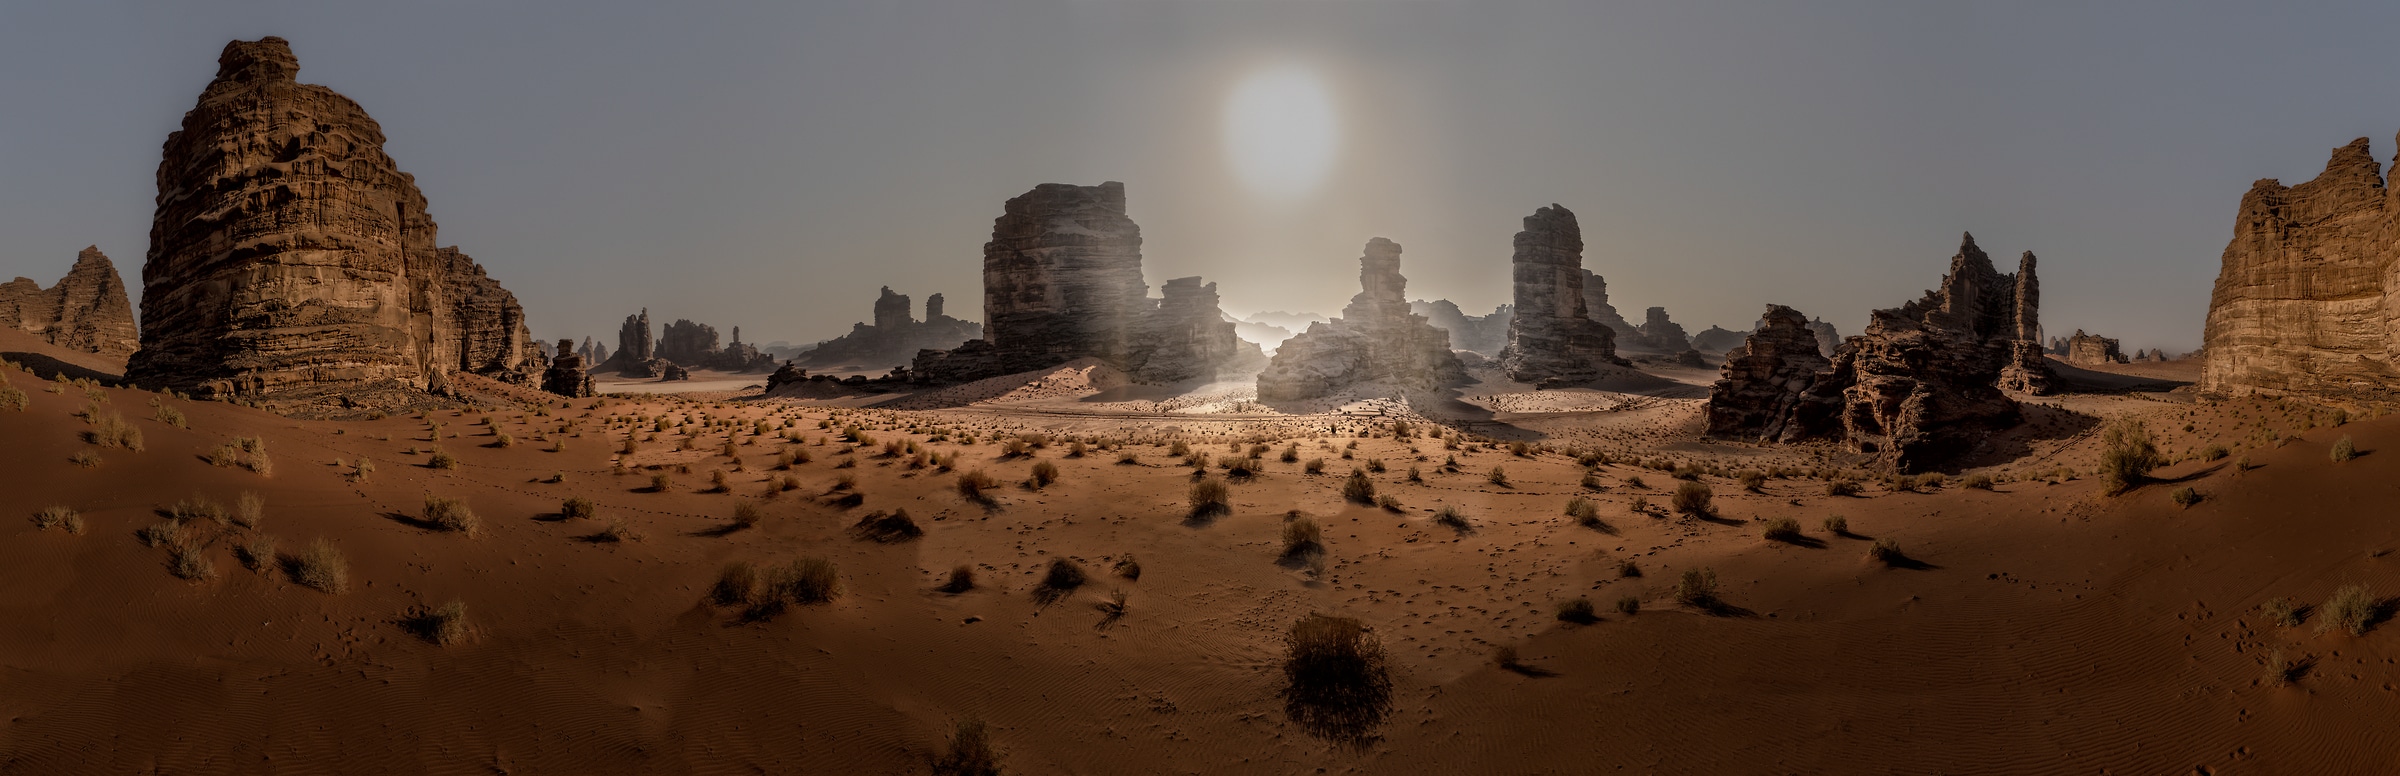 1,025 megapixels! A very high resolution, large-format VAST photo print of the sun in the desert with unique rock formations; landscape photograph created by Peter Rodger in Tabuk, Saudi Arabia